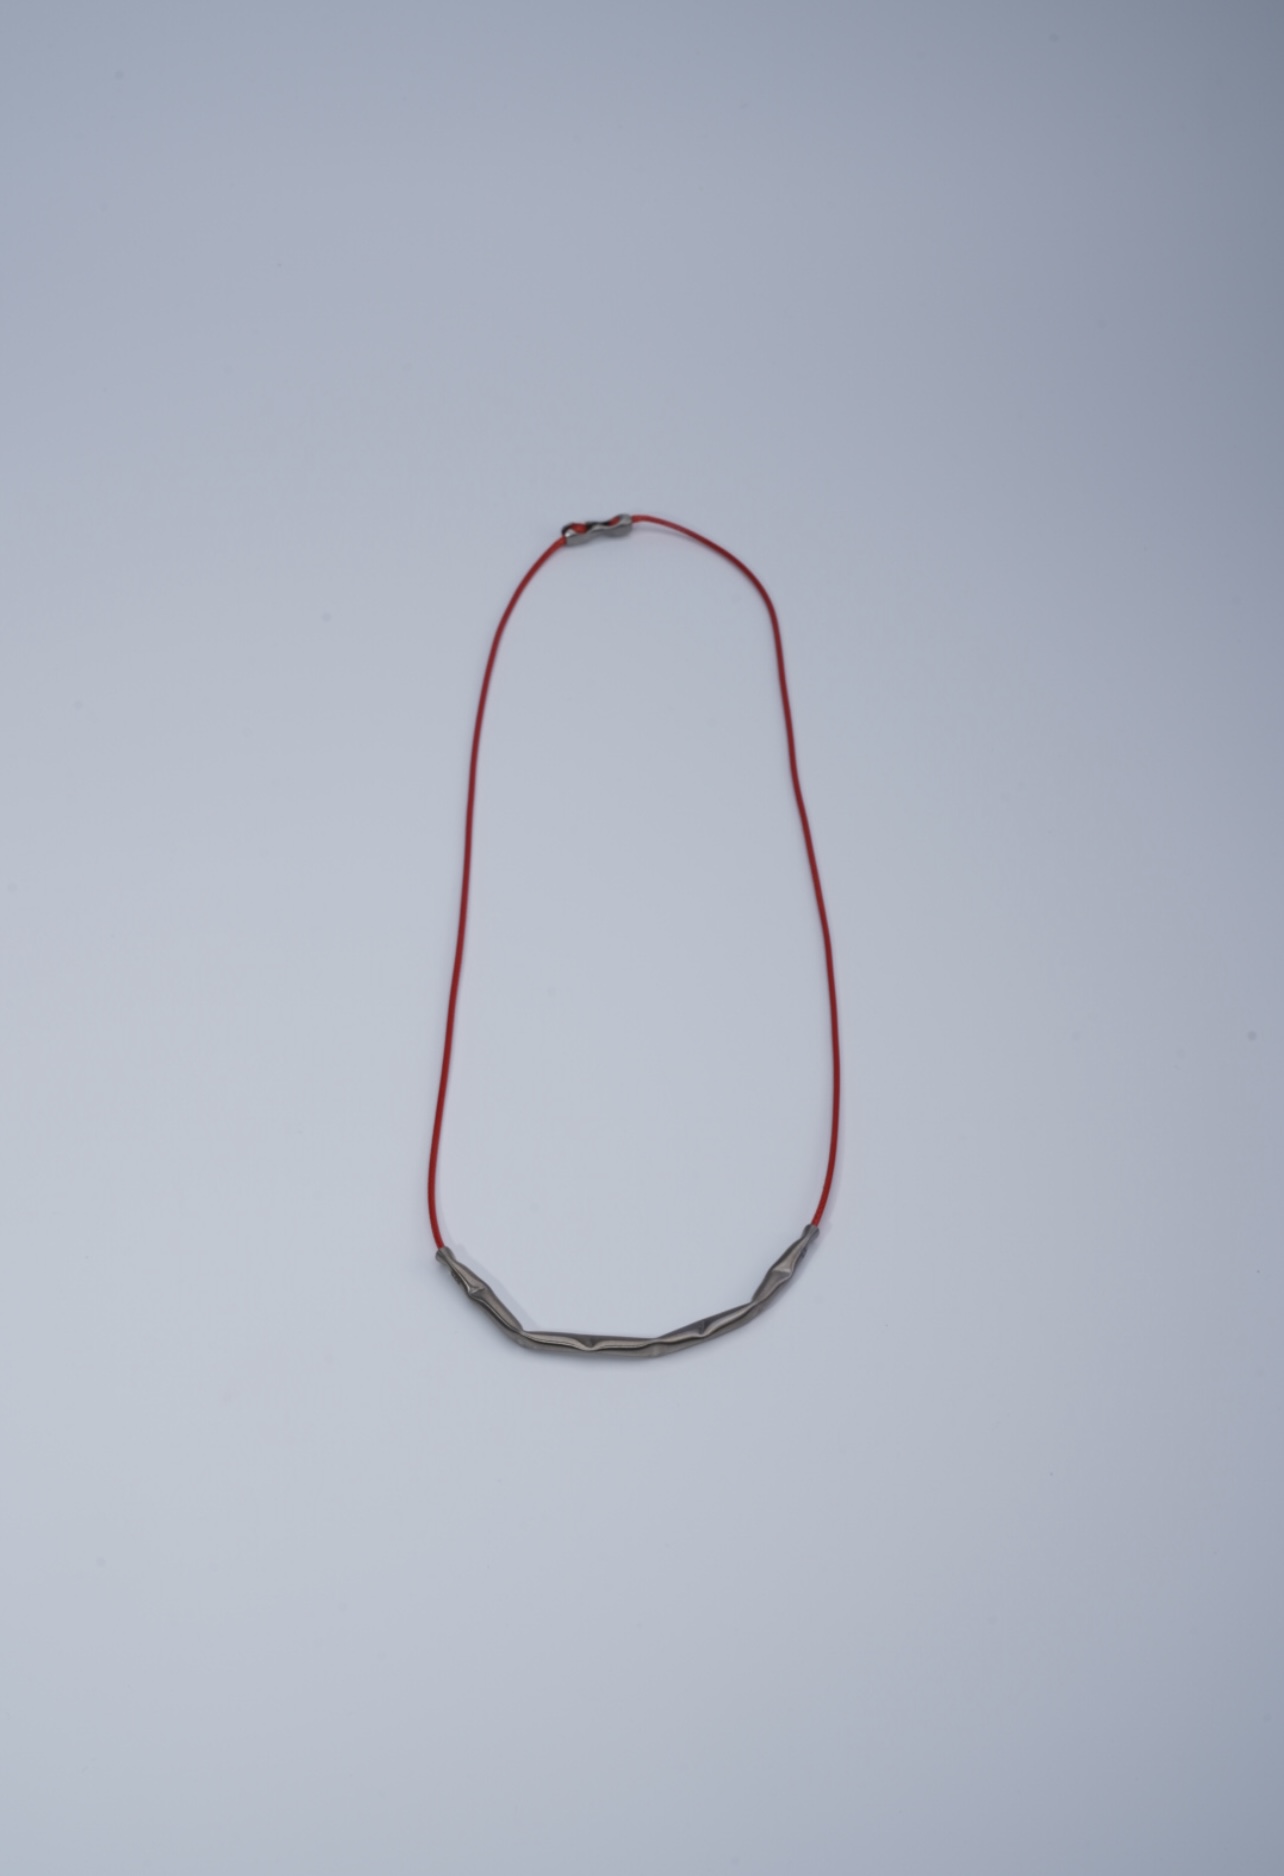 24K white gold vermeil necklace in 925 silver with red silk cord